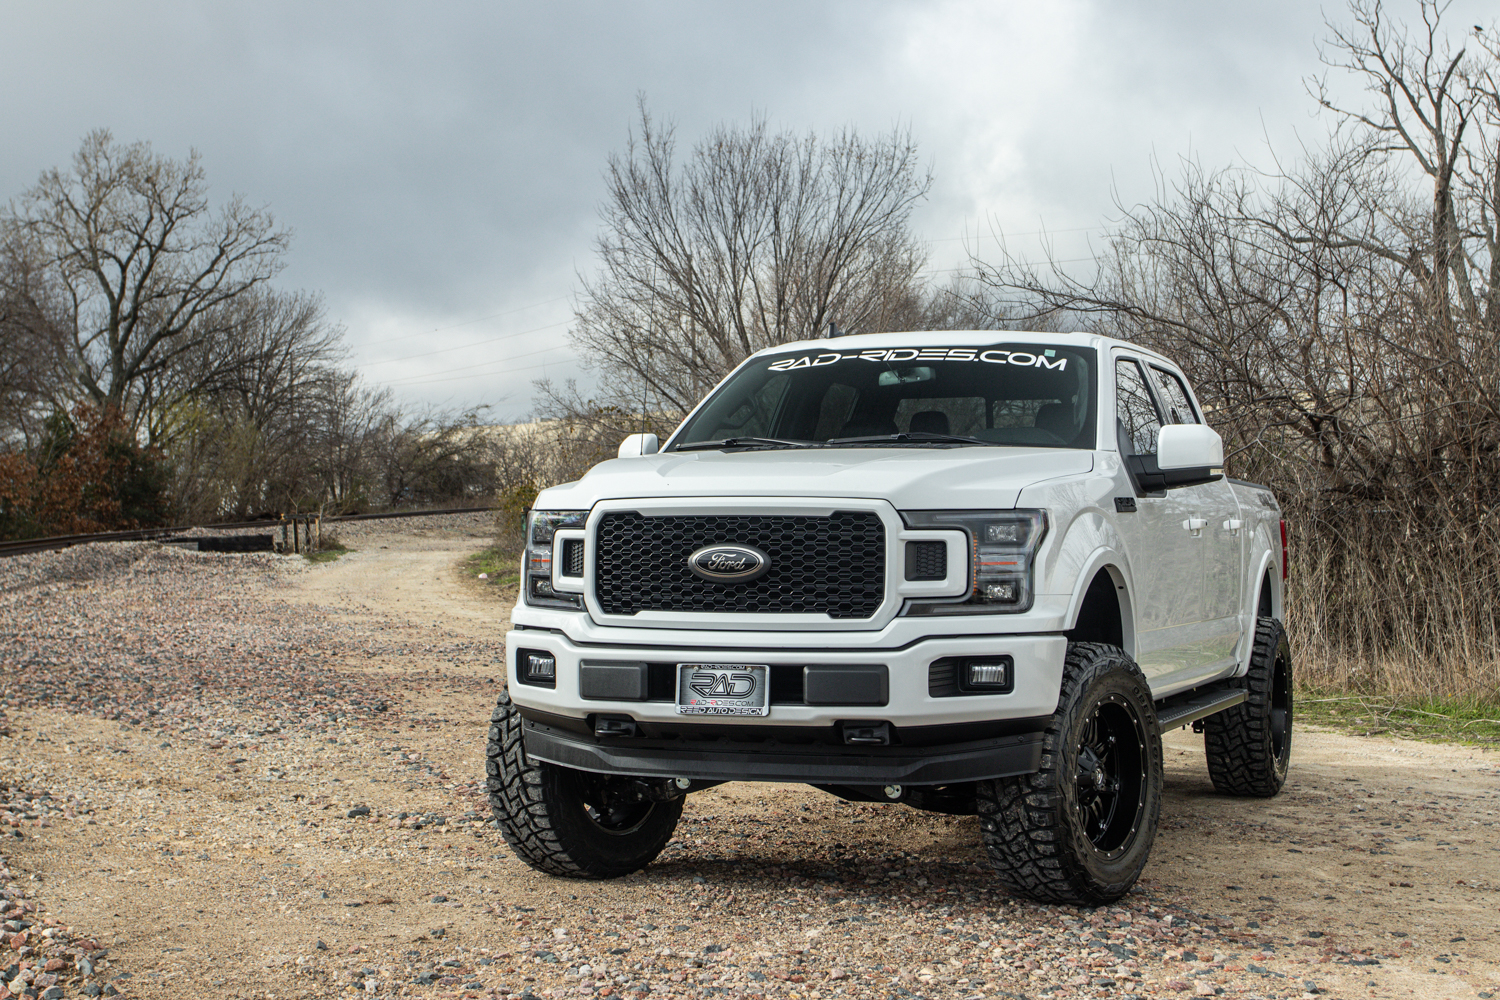 30 Top Pictures 2020 Ford F150 Sport Package : 2020 Ford F 150 Truck Tough Features Ford Com